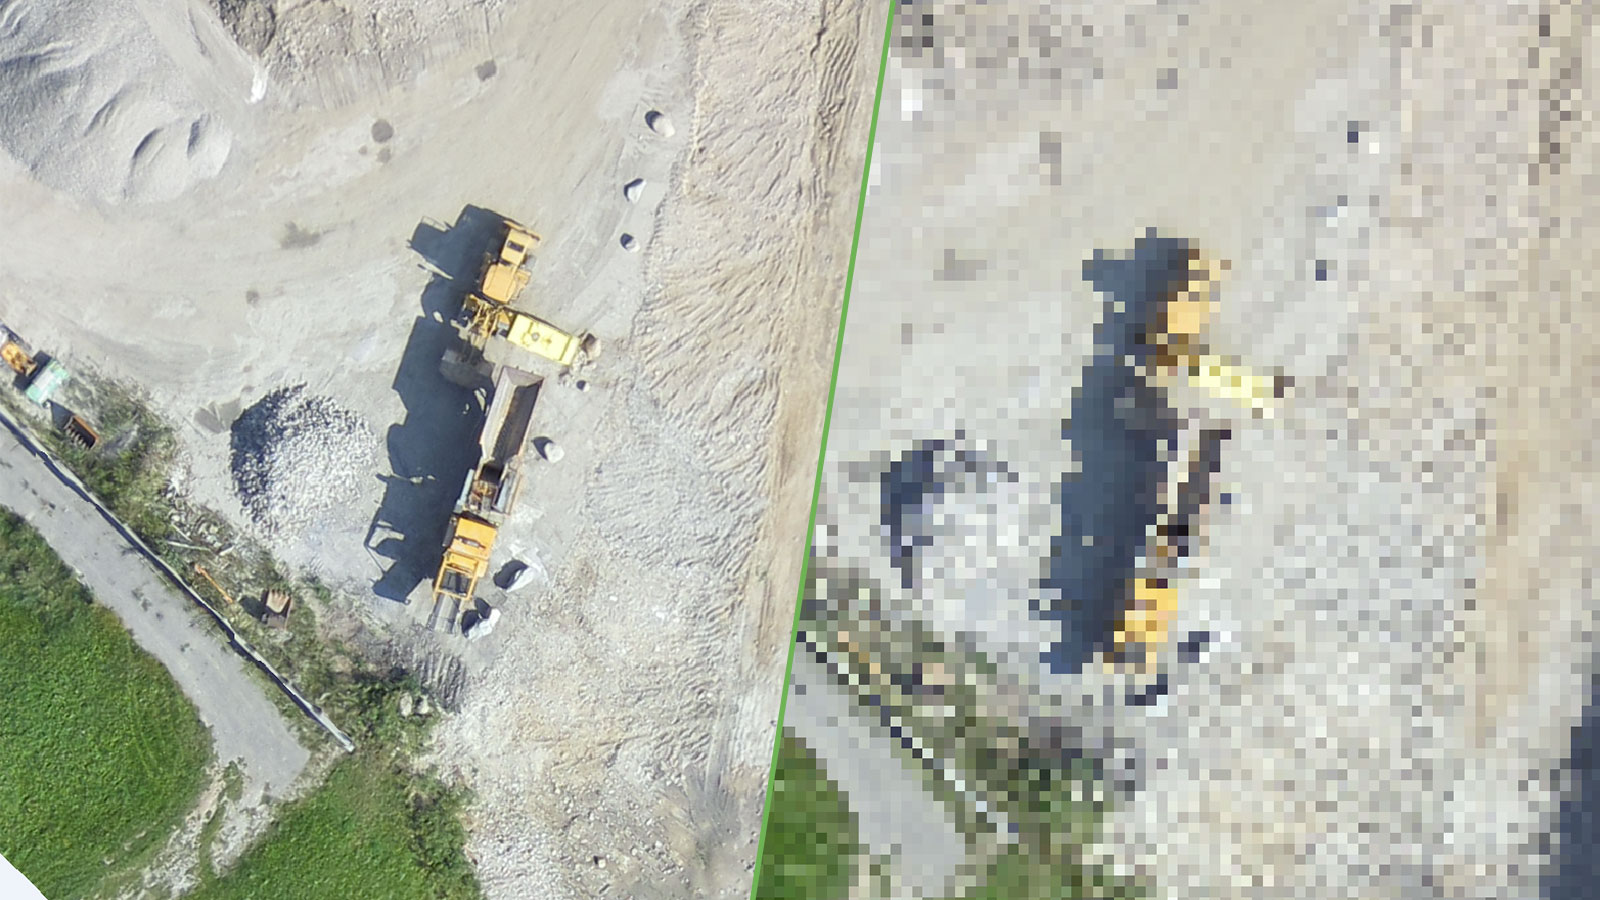 Differences in ground resolution in aerial mapping